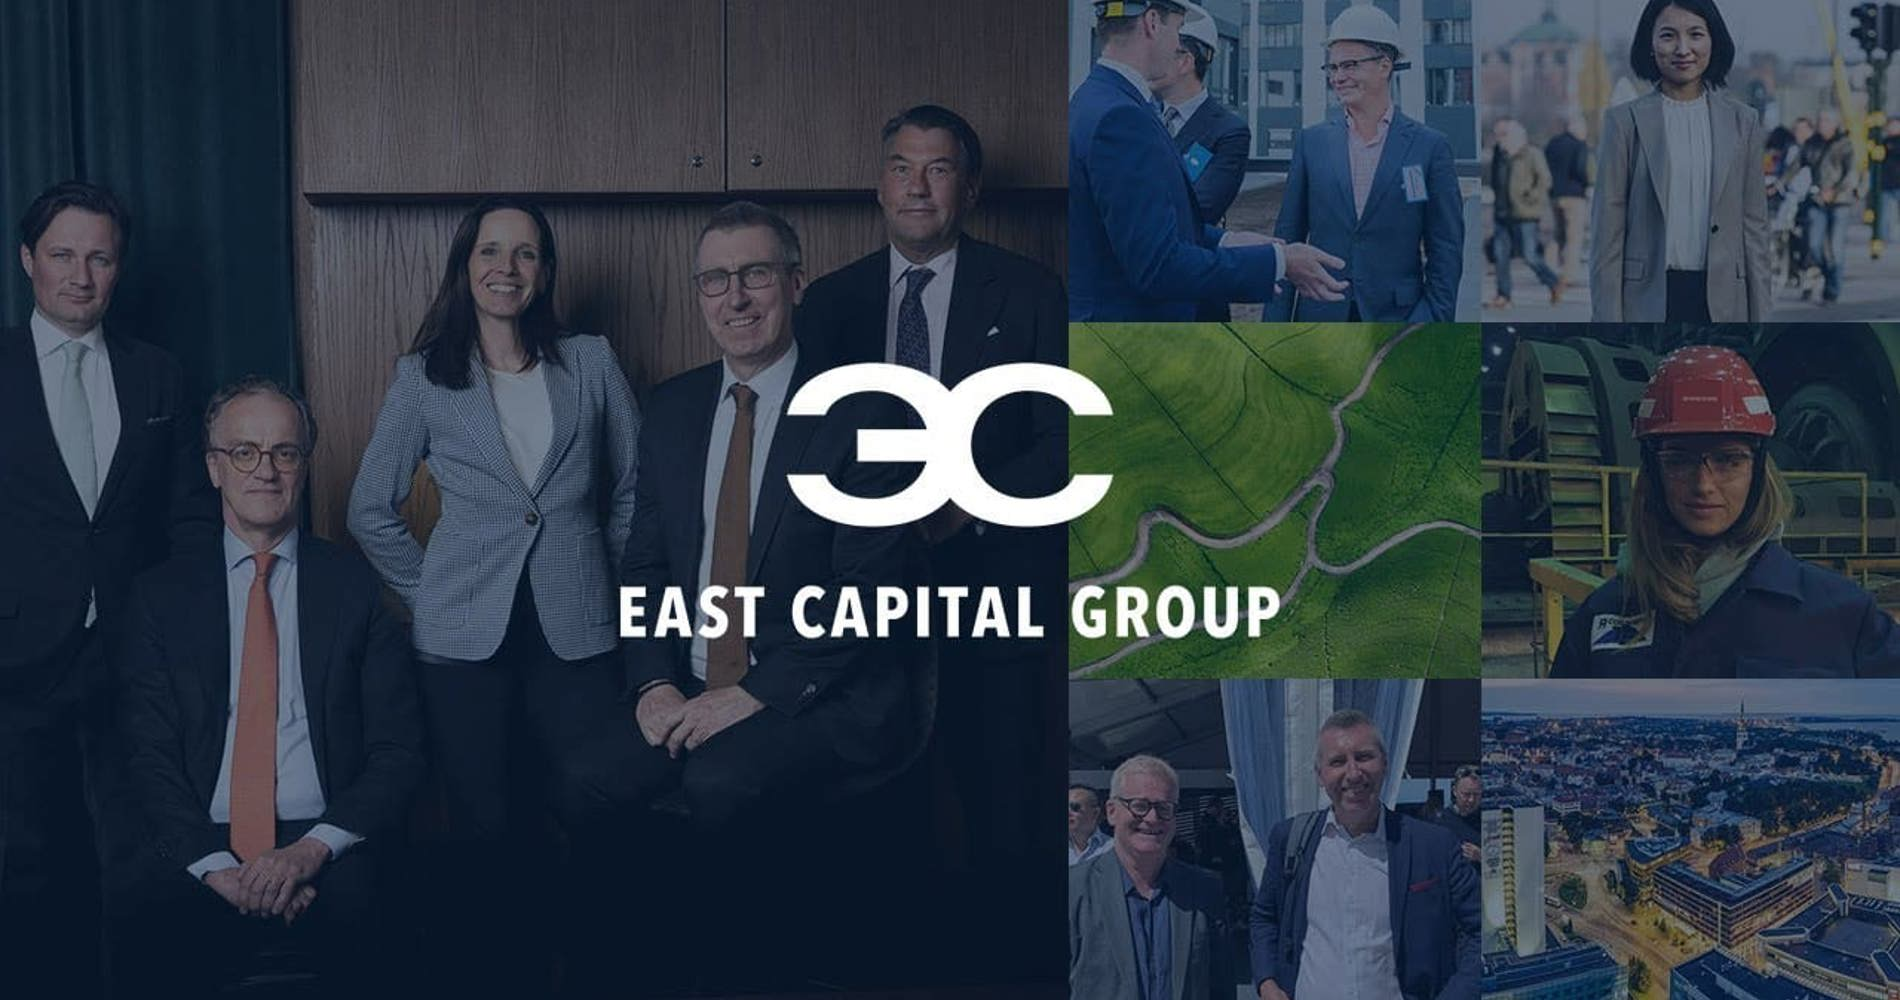 Employees of East Capital Group.